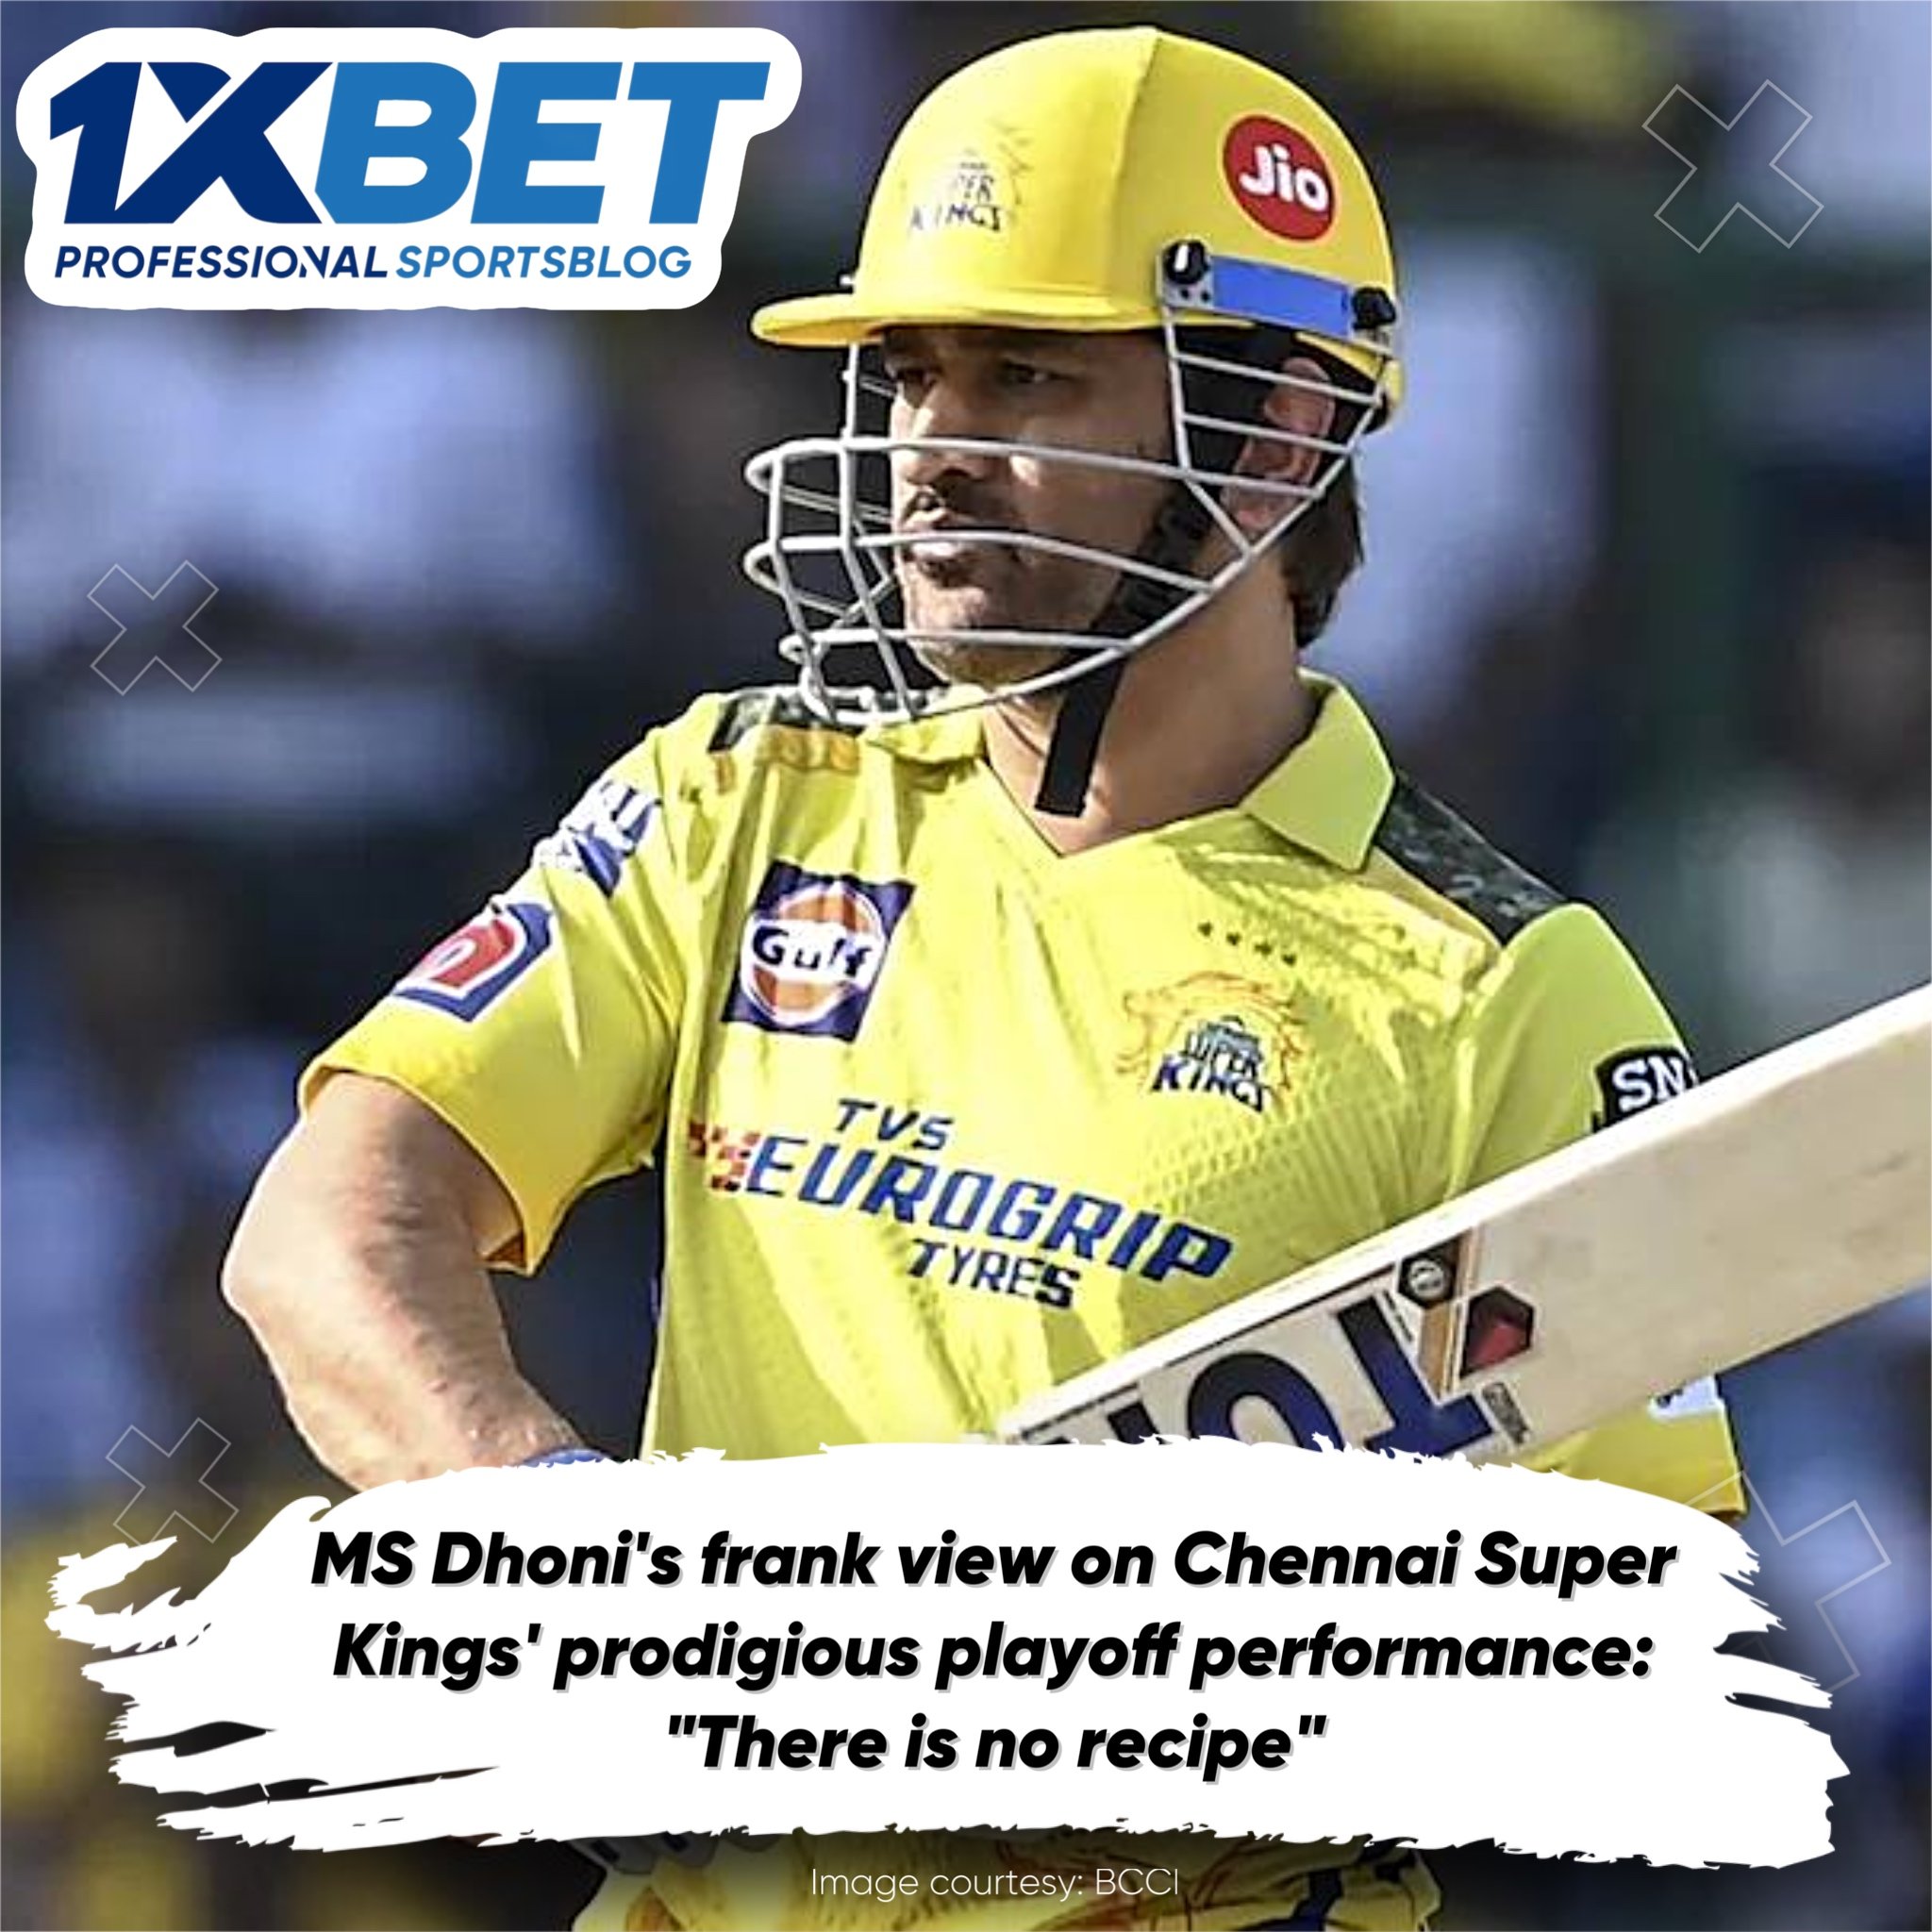 MS Dhoni's frank view on Chennai Super Kings' prodigious playoff performance: "There is no recipe"